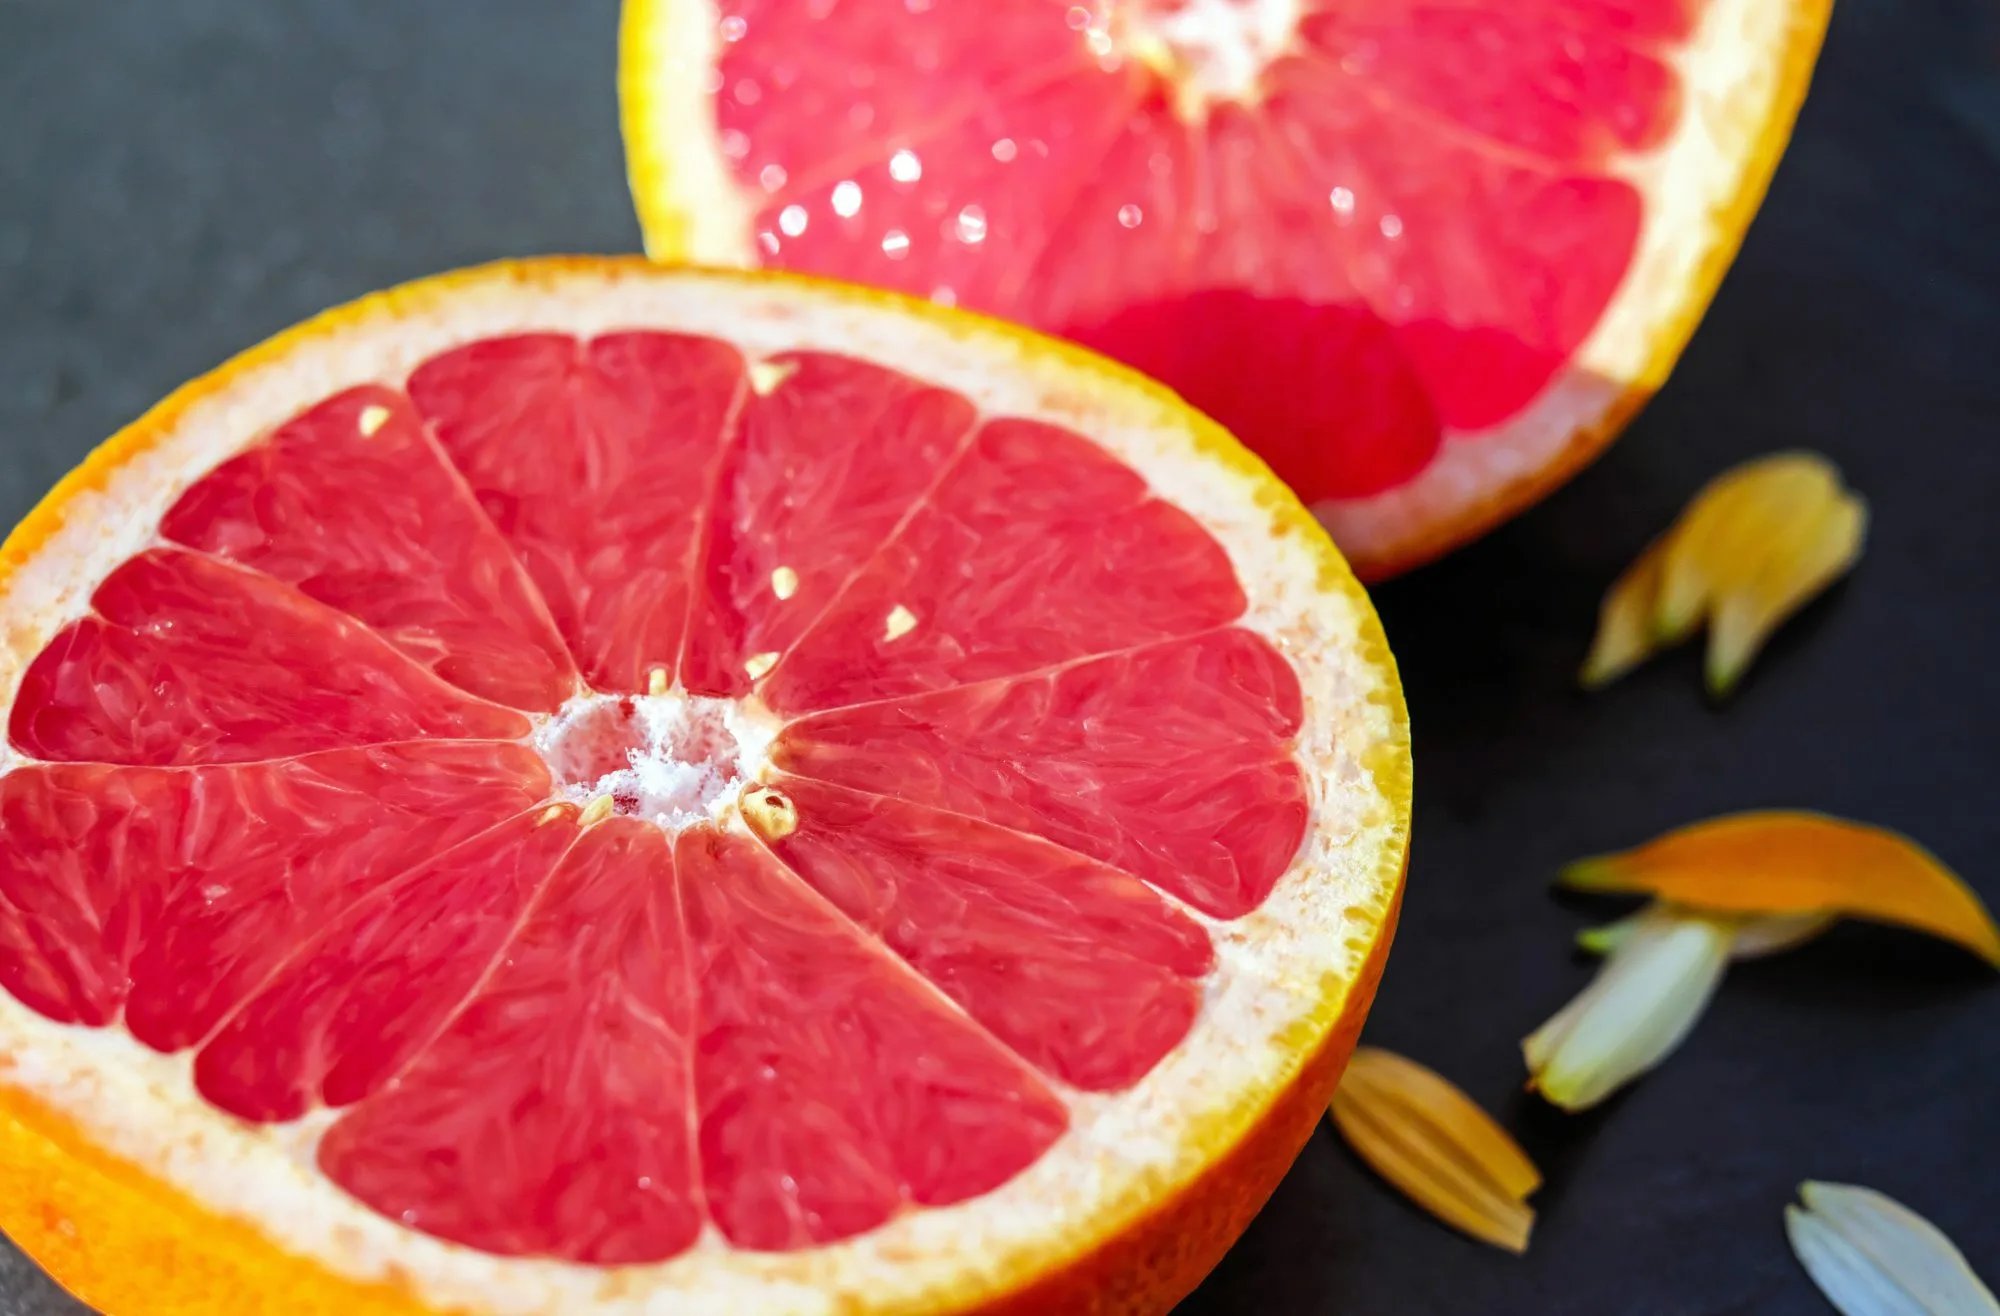 Grapefruit Secrets: All About The Pink Superfood Bombs